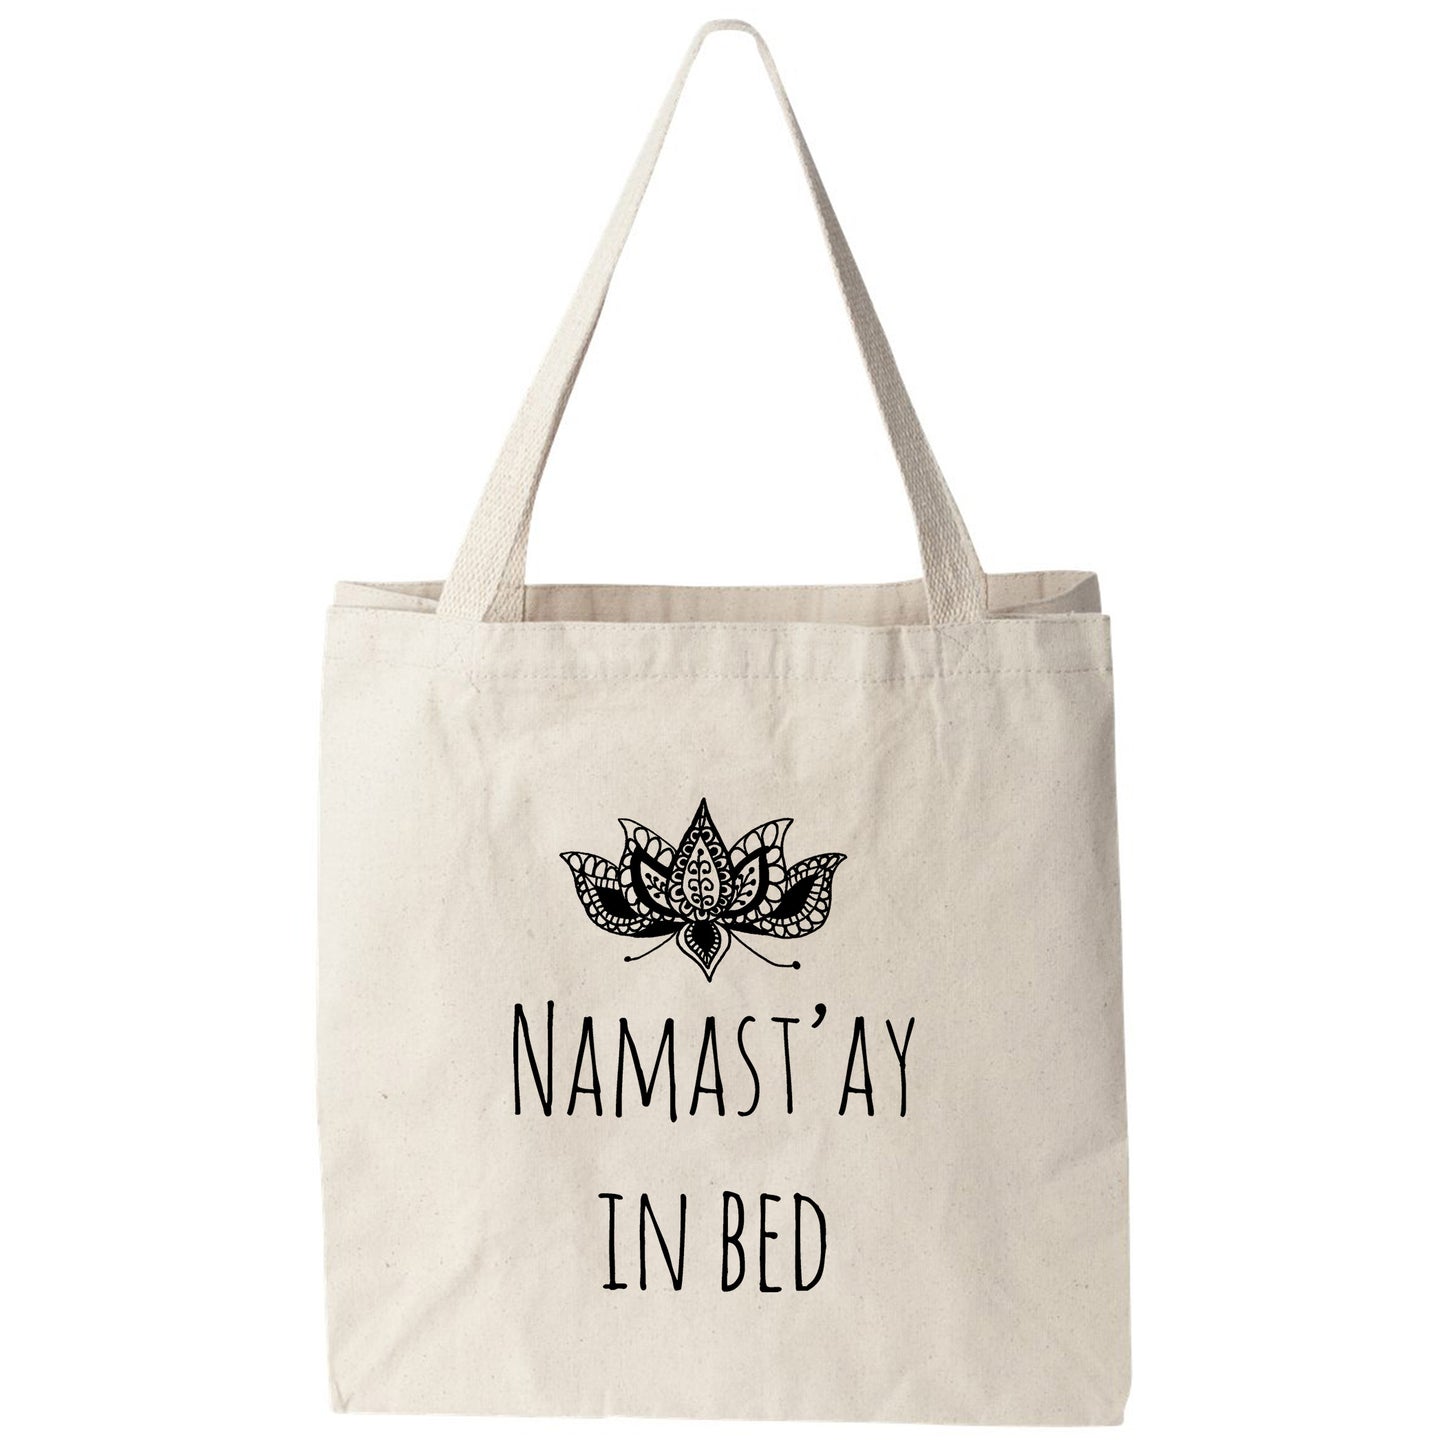 a tote bag that says namast ay in bed